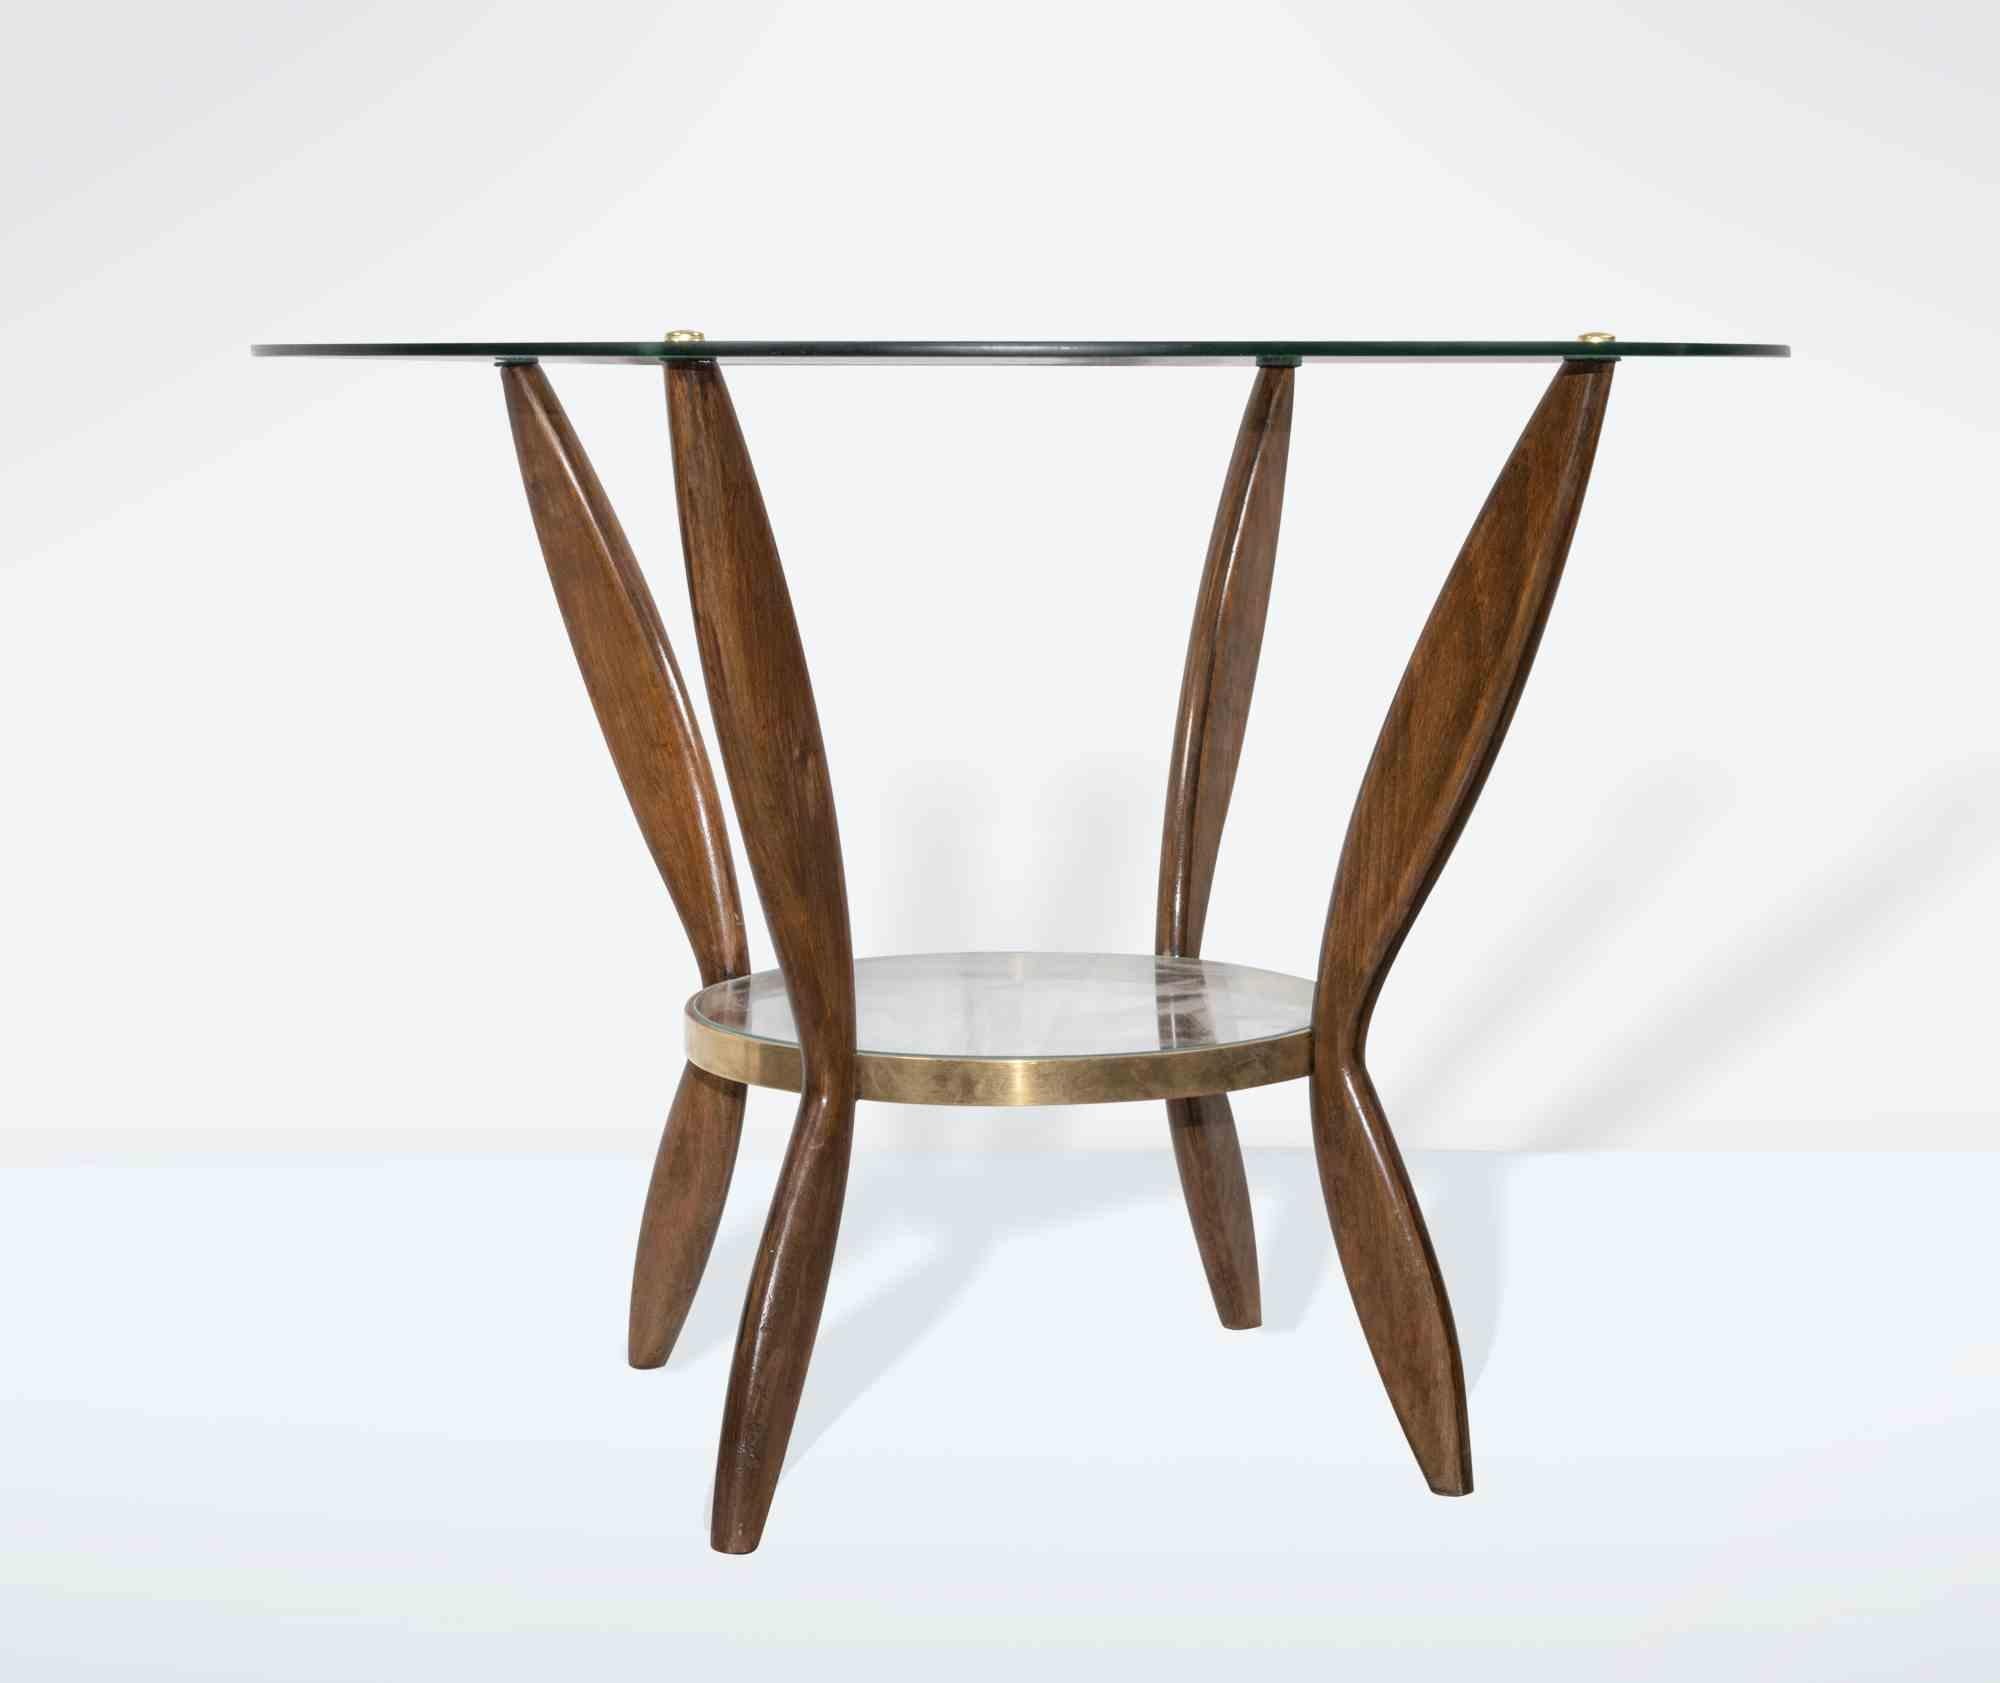 Pair of Coffee Table is an original design furniture item realized by Gio Ponti in the 1950s.

Beautiful pair of wooden coffee tables with glass tops and brass finishes. Beech Wood.

Gio Ponti (Milan 1891 - 1979) is an architect, designer and